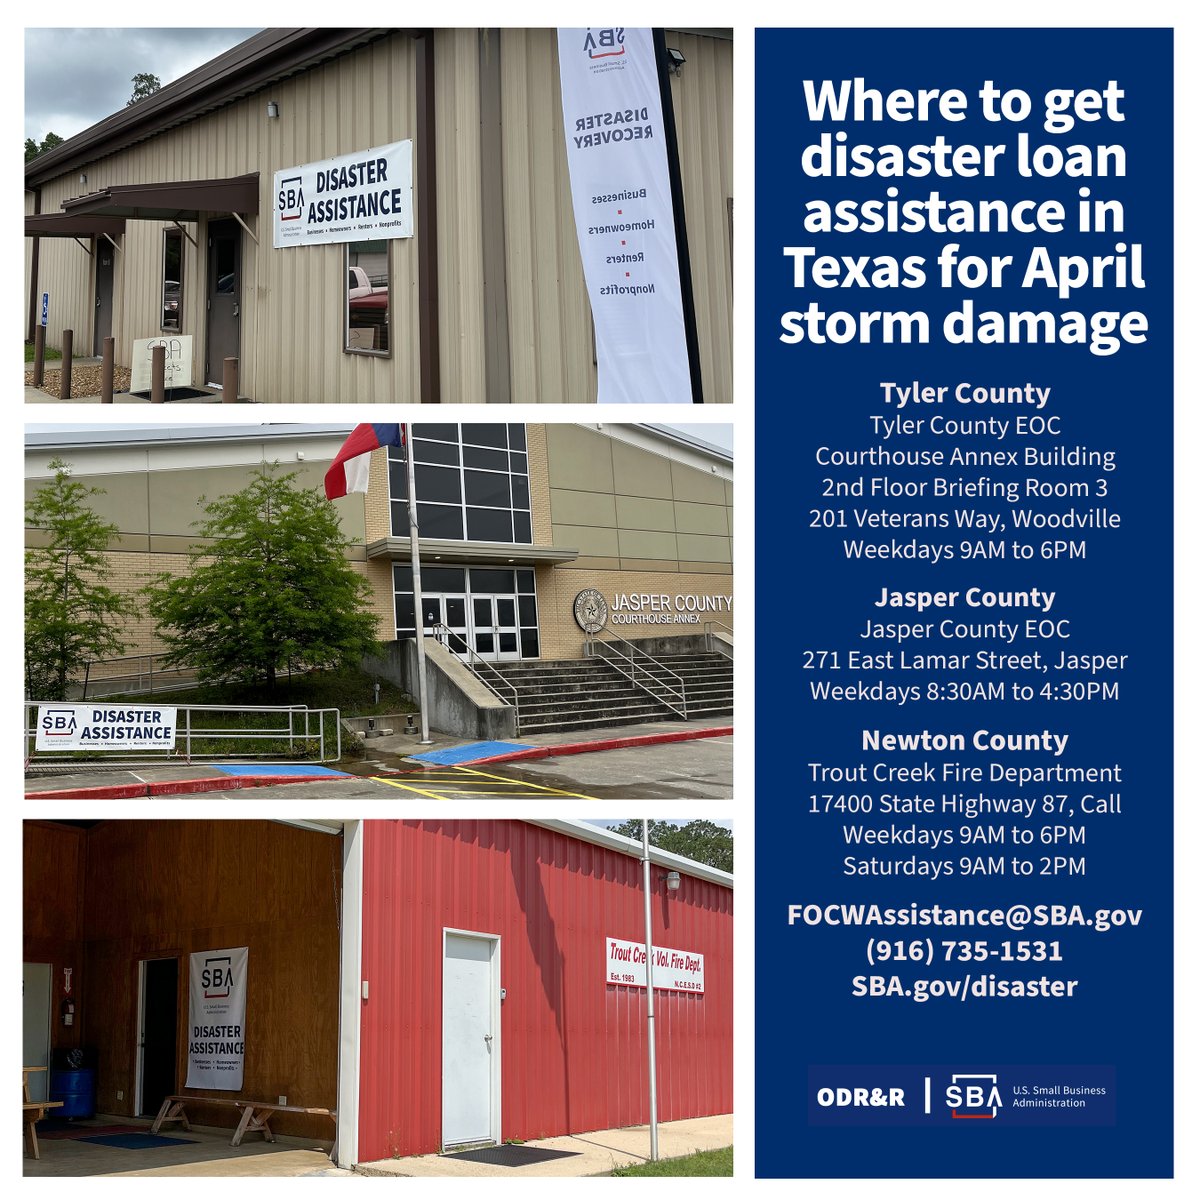 Are you a Texas resident or business in Jasper, Tyler, or Newton County with April storm damage? We’re here to help. @SBAgov opened disaster loan outreach centers in your area to assist with applications. For more information or to apply online, visit sba.gov/disaster.